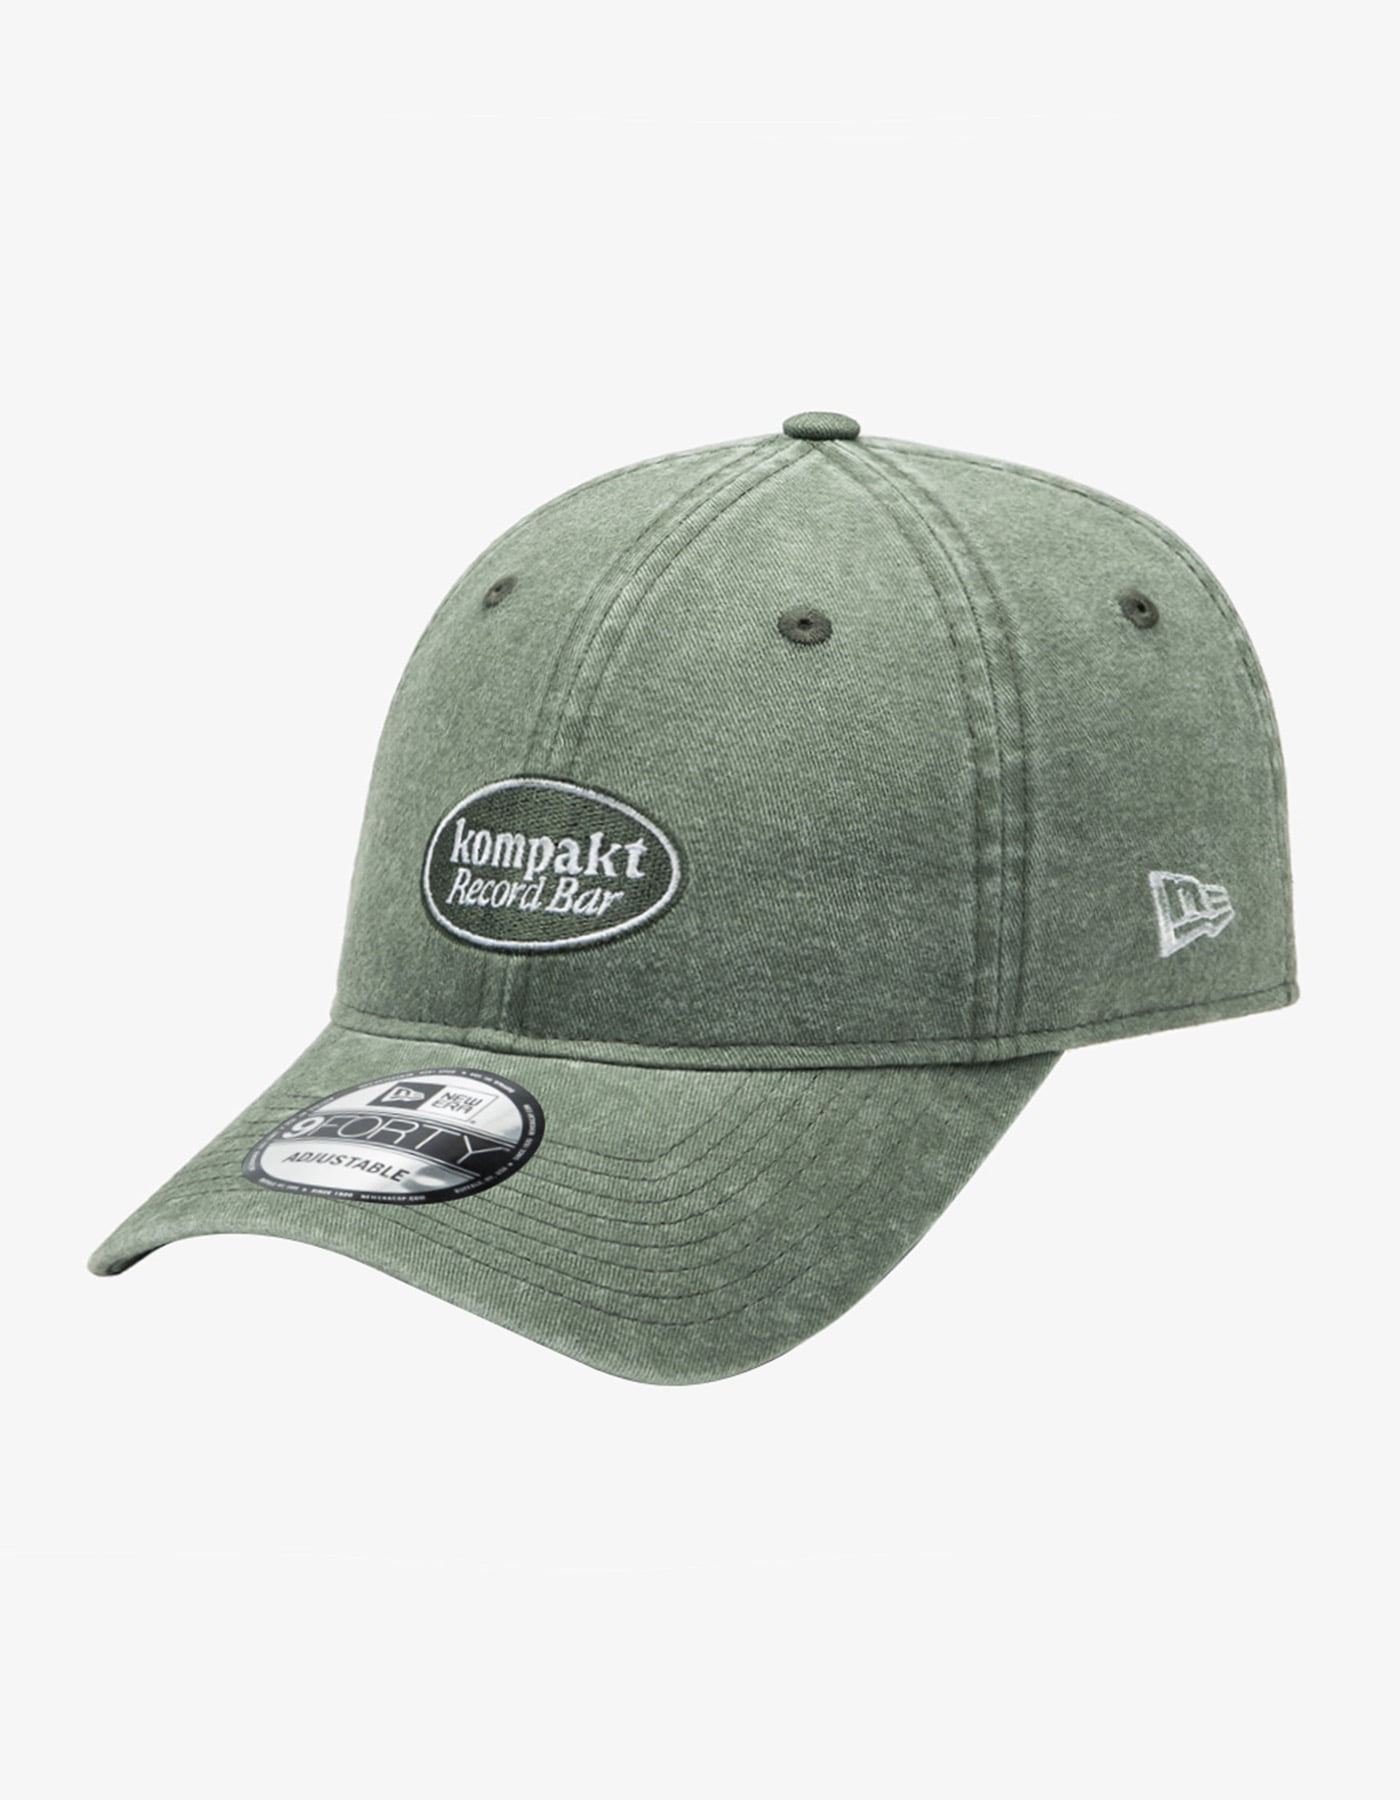 [NEWERA]KRB Oval Logo 9forty Unstructured Cap - Khaki